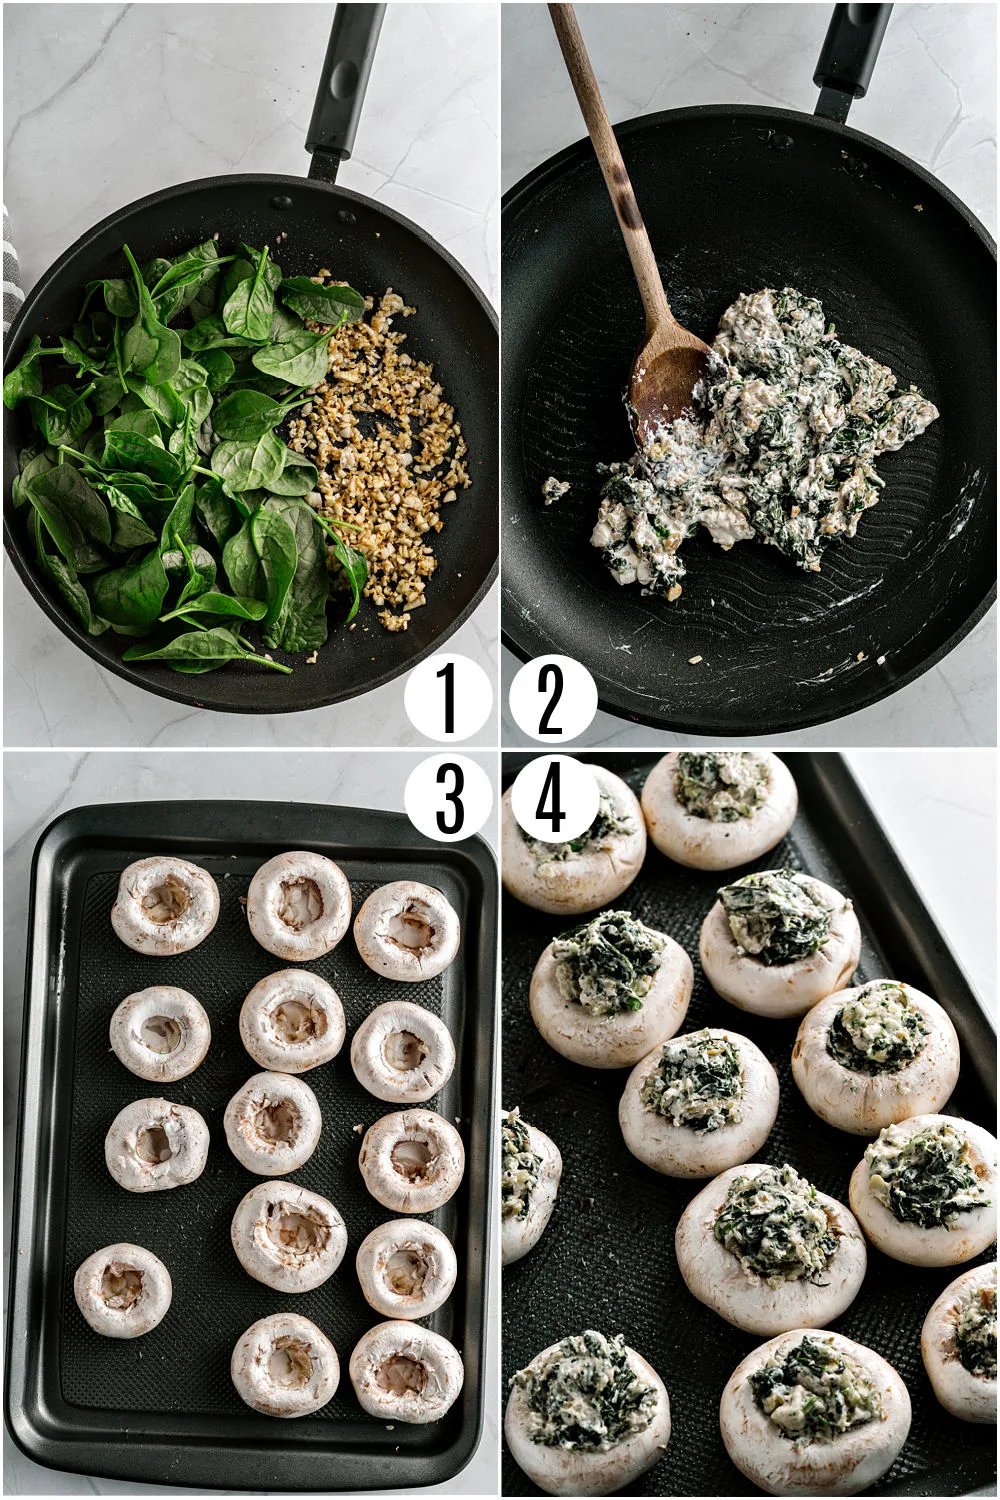 Step by step photos showing how to make stuffed mushrooms.